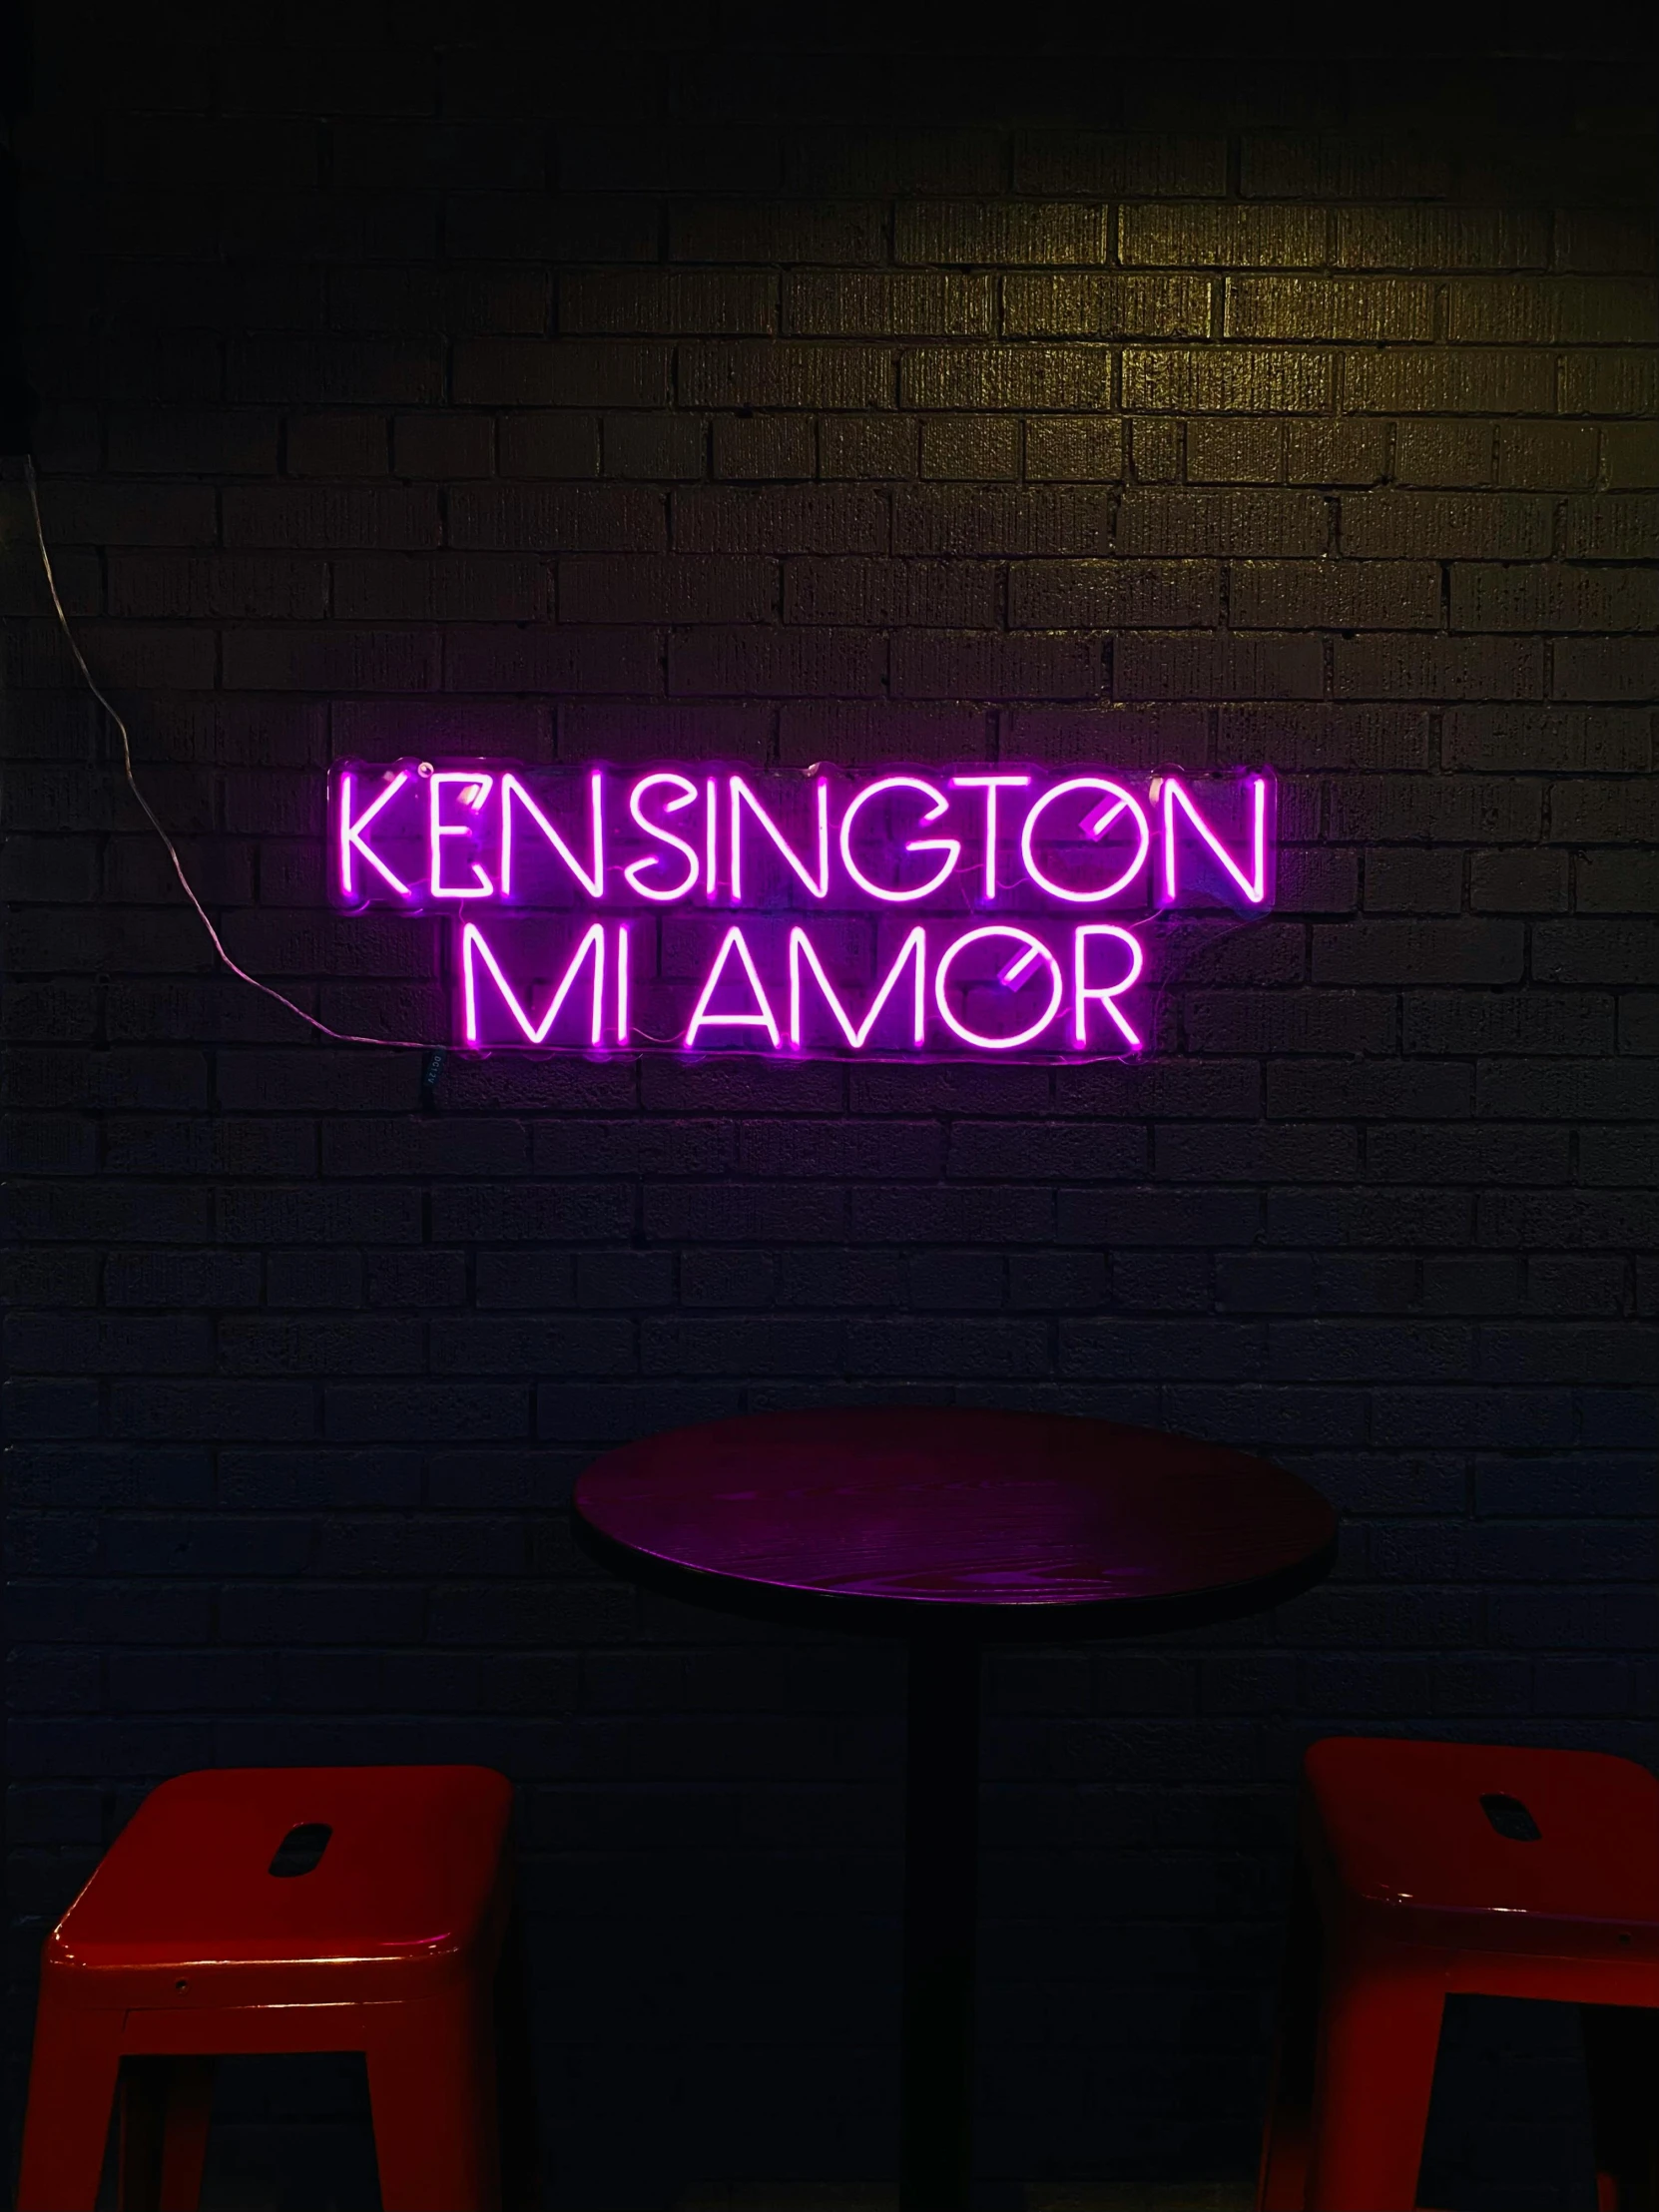 there is a neon sign lit up on a wall